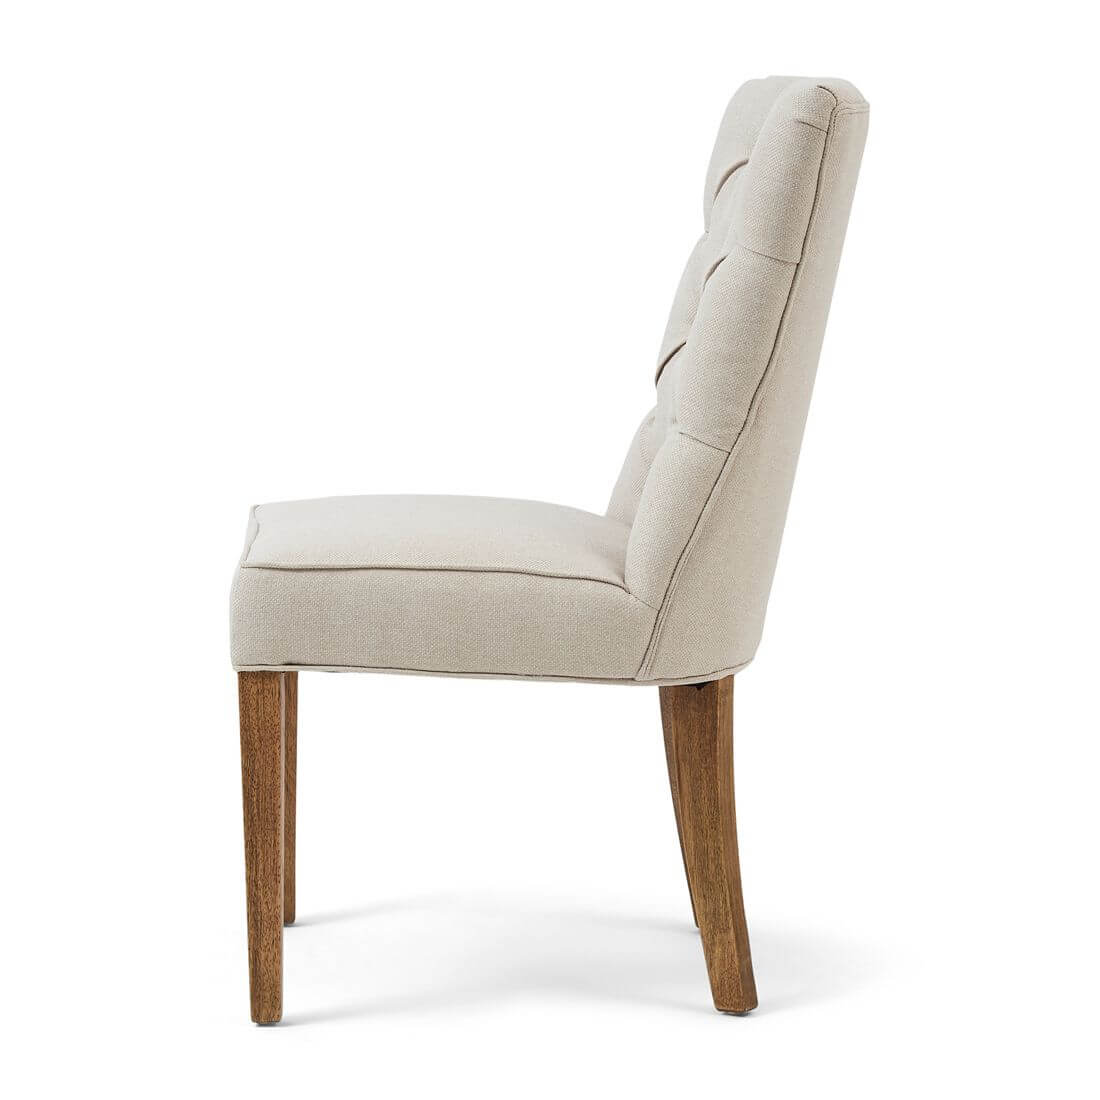 Balmoral Dining Chair, oxford weave, flanders flax